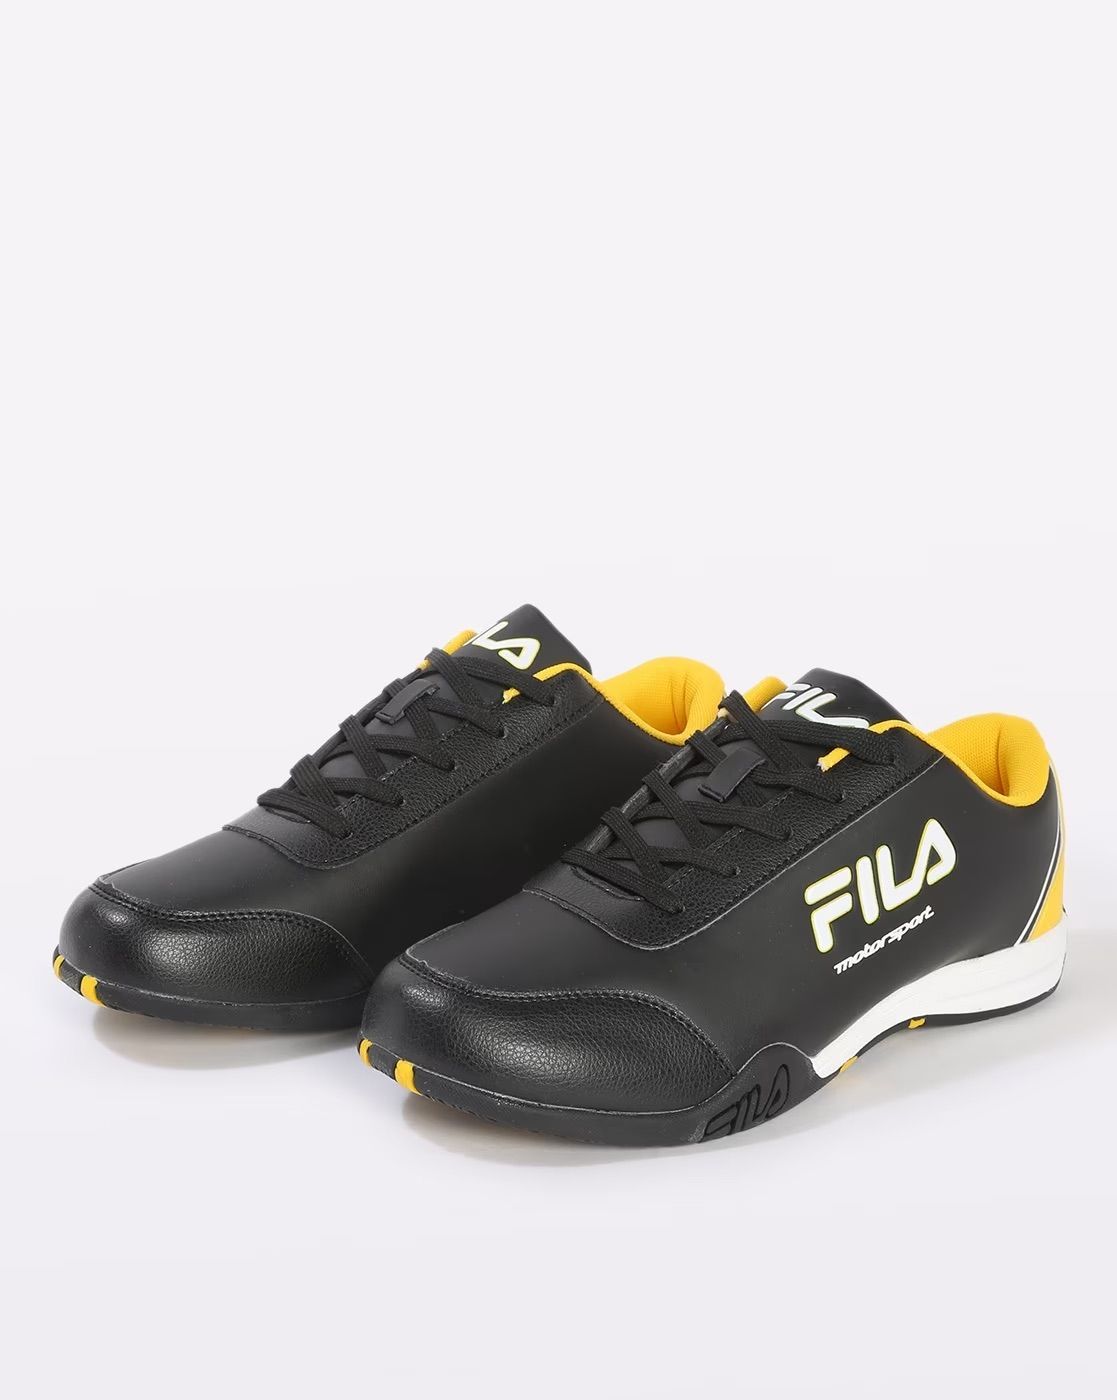 Top more than 196 fila sneakers yellow latest